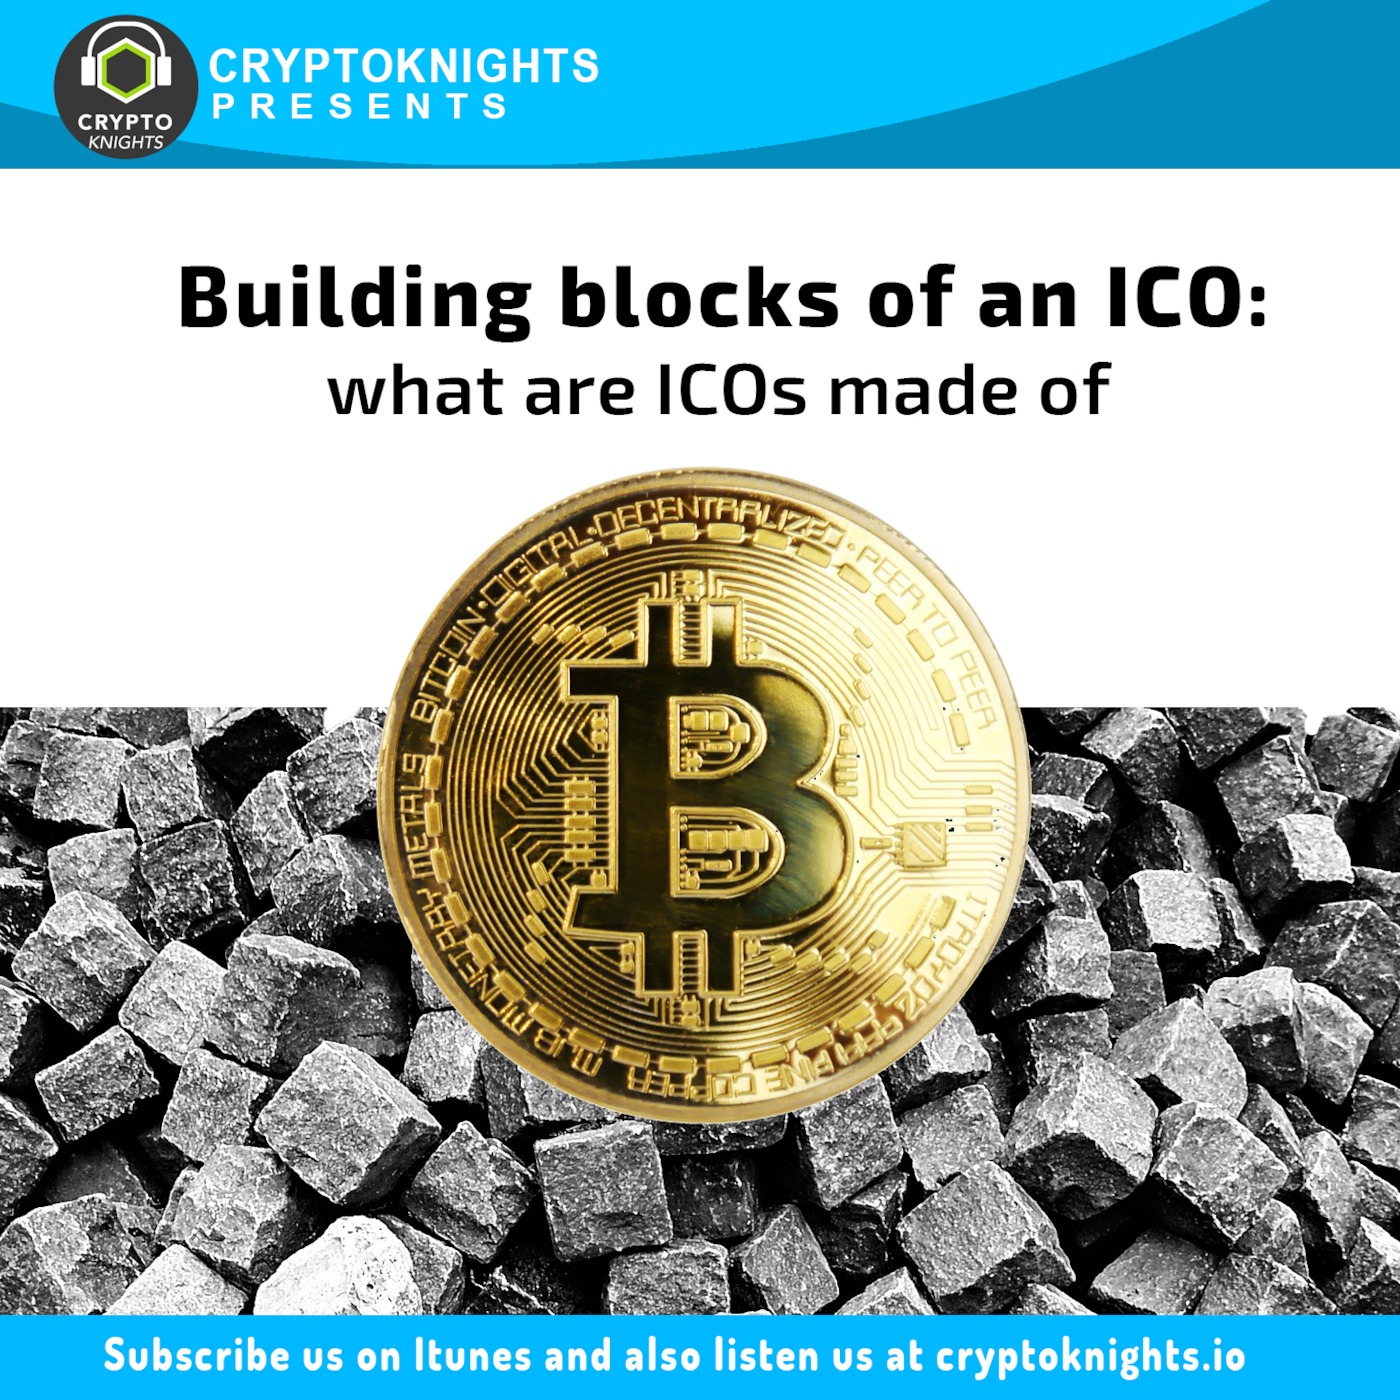 Building Blocks of an ICO: What are ICO made of